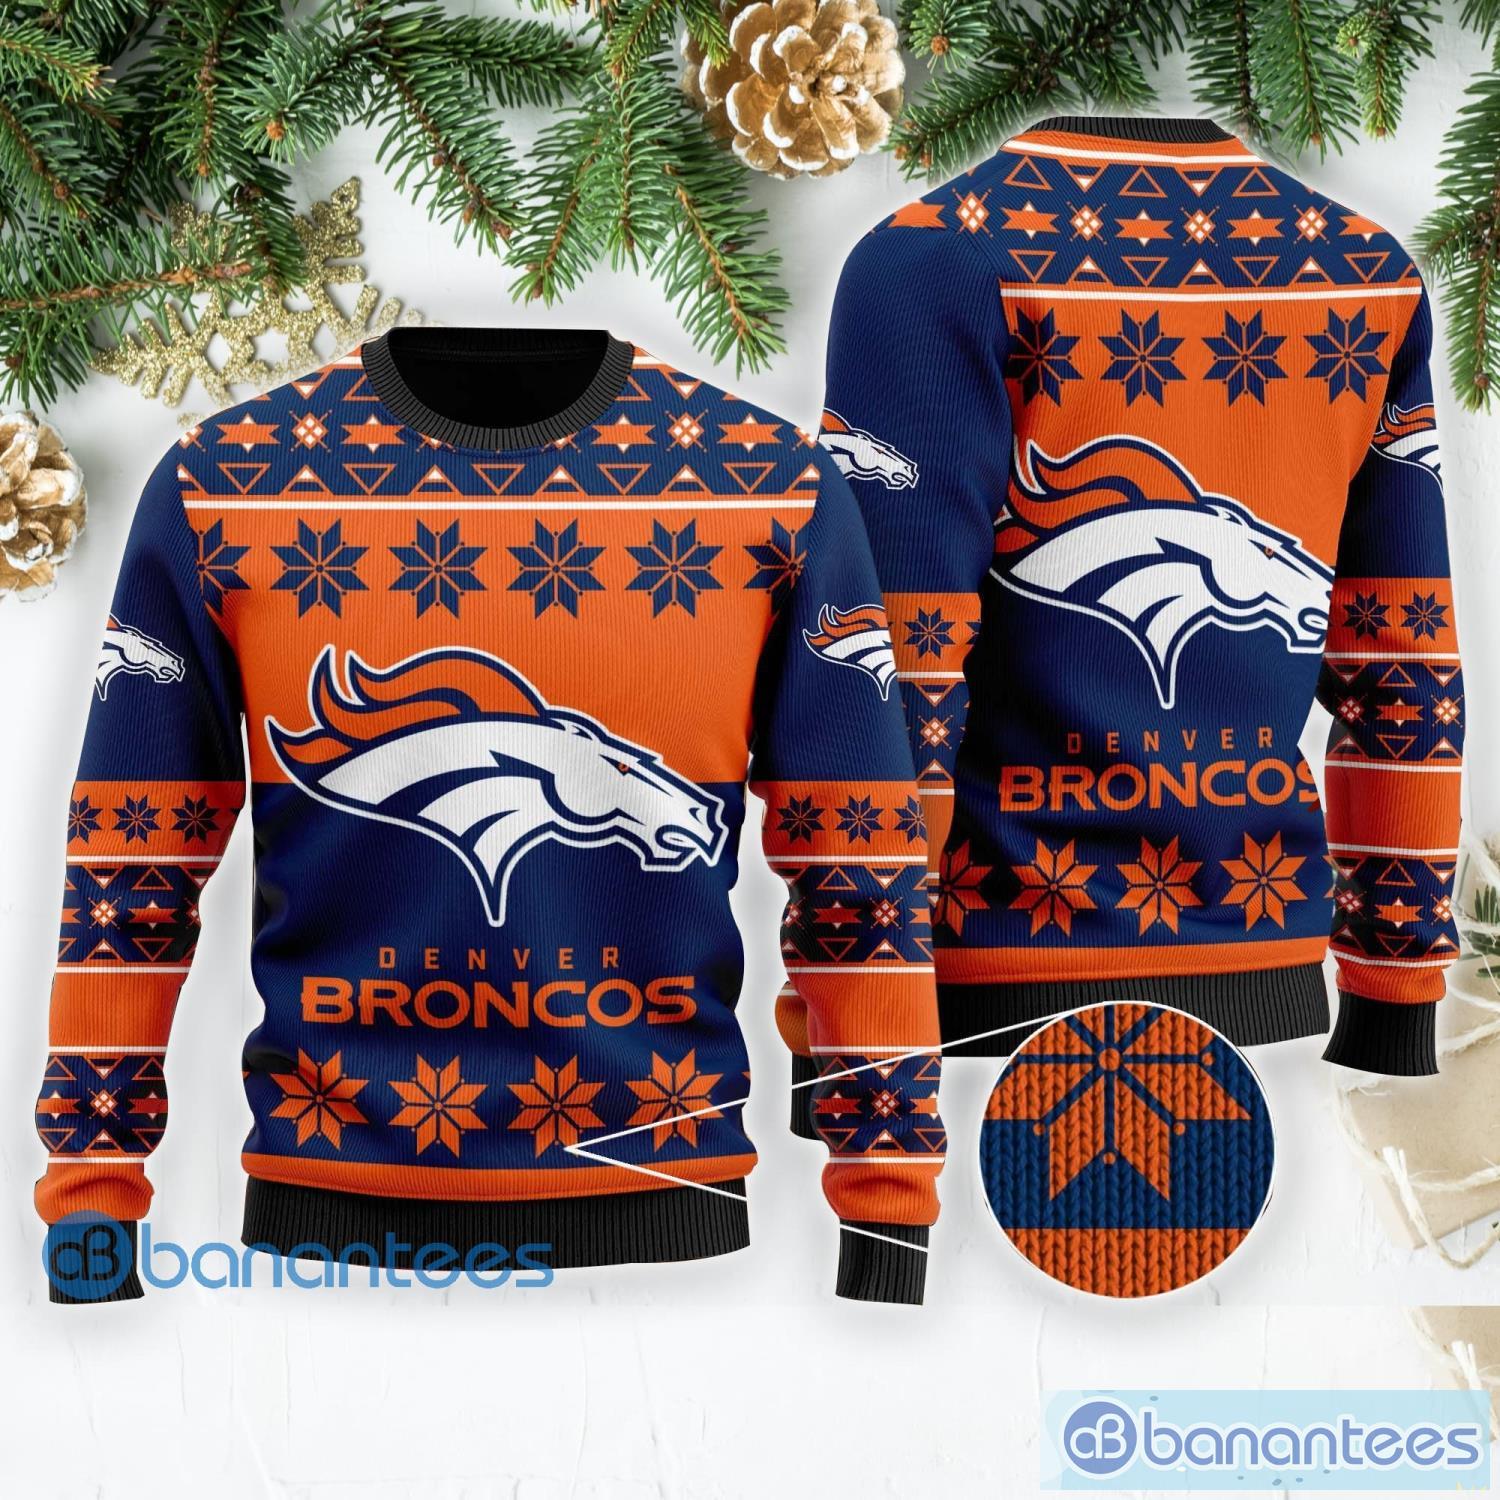 Denver Broncos Ugly Christmas Sweater For Fans - Banantees